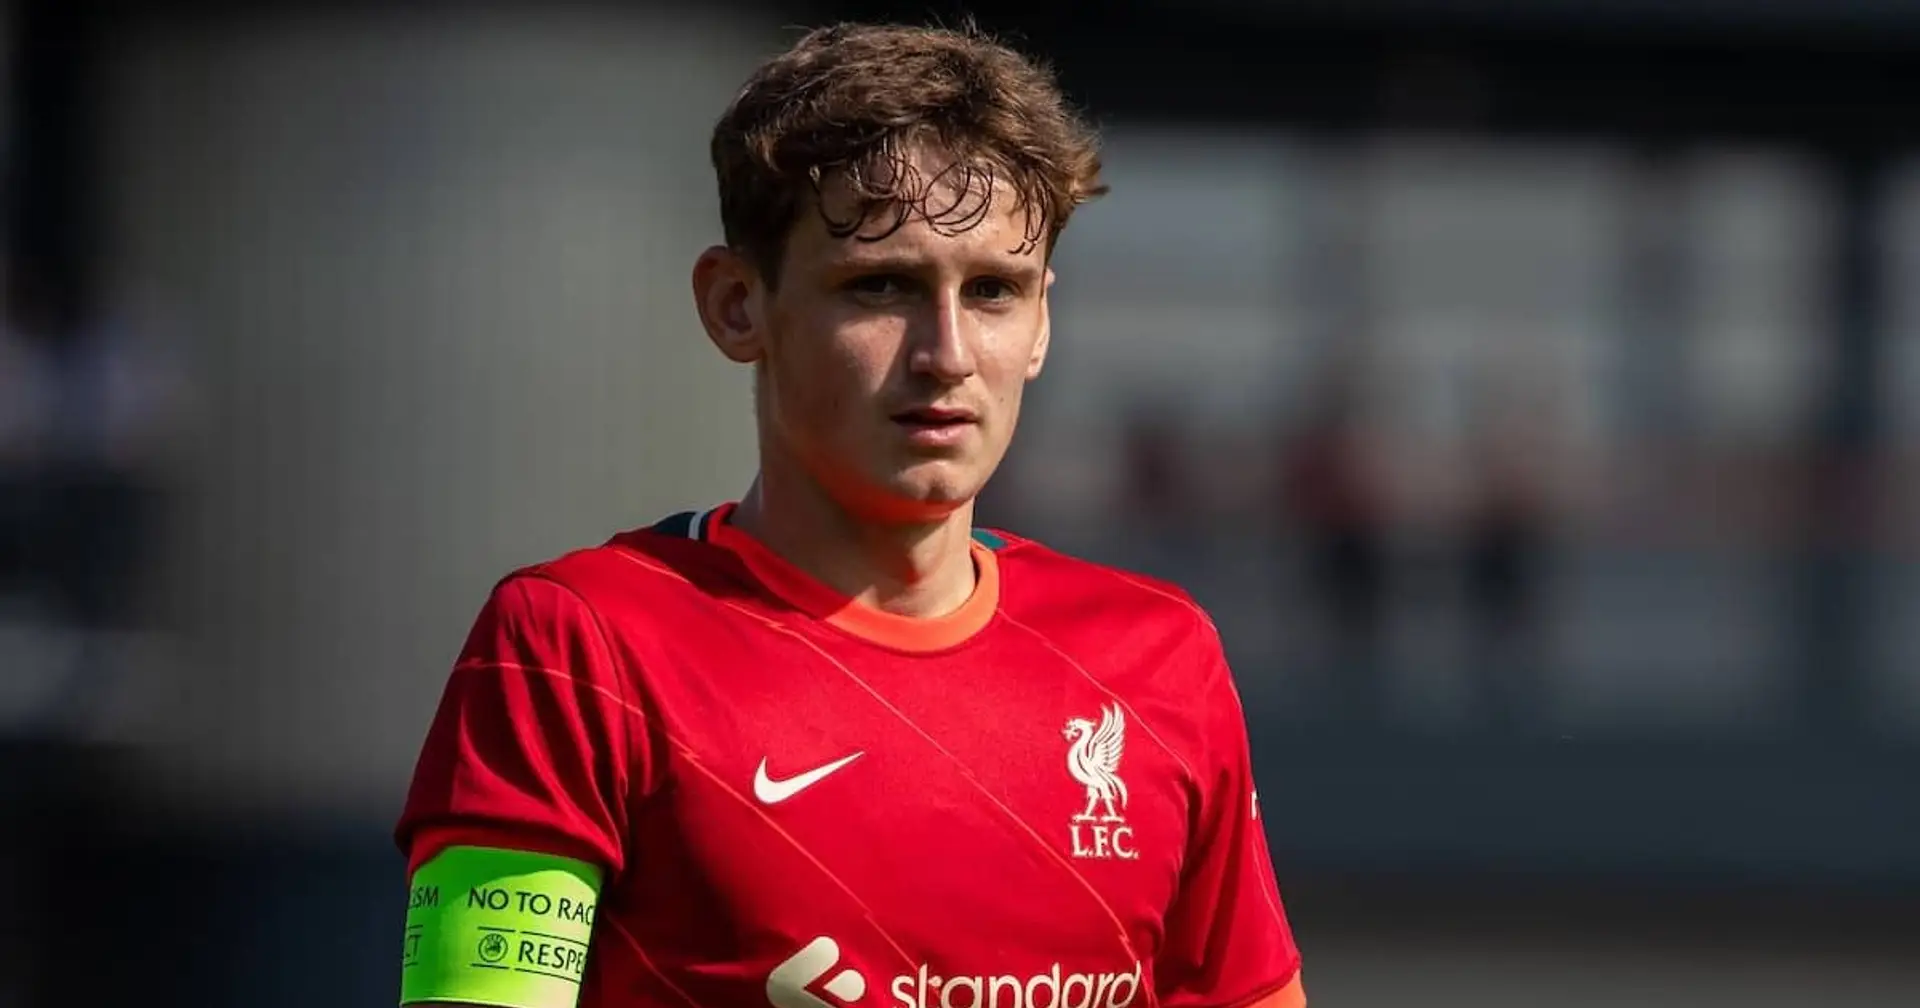 Liverpool put Tyler Morton's loan move on hold due to injuries in the squad (reliability: 4 stars)